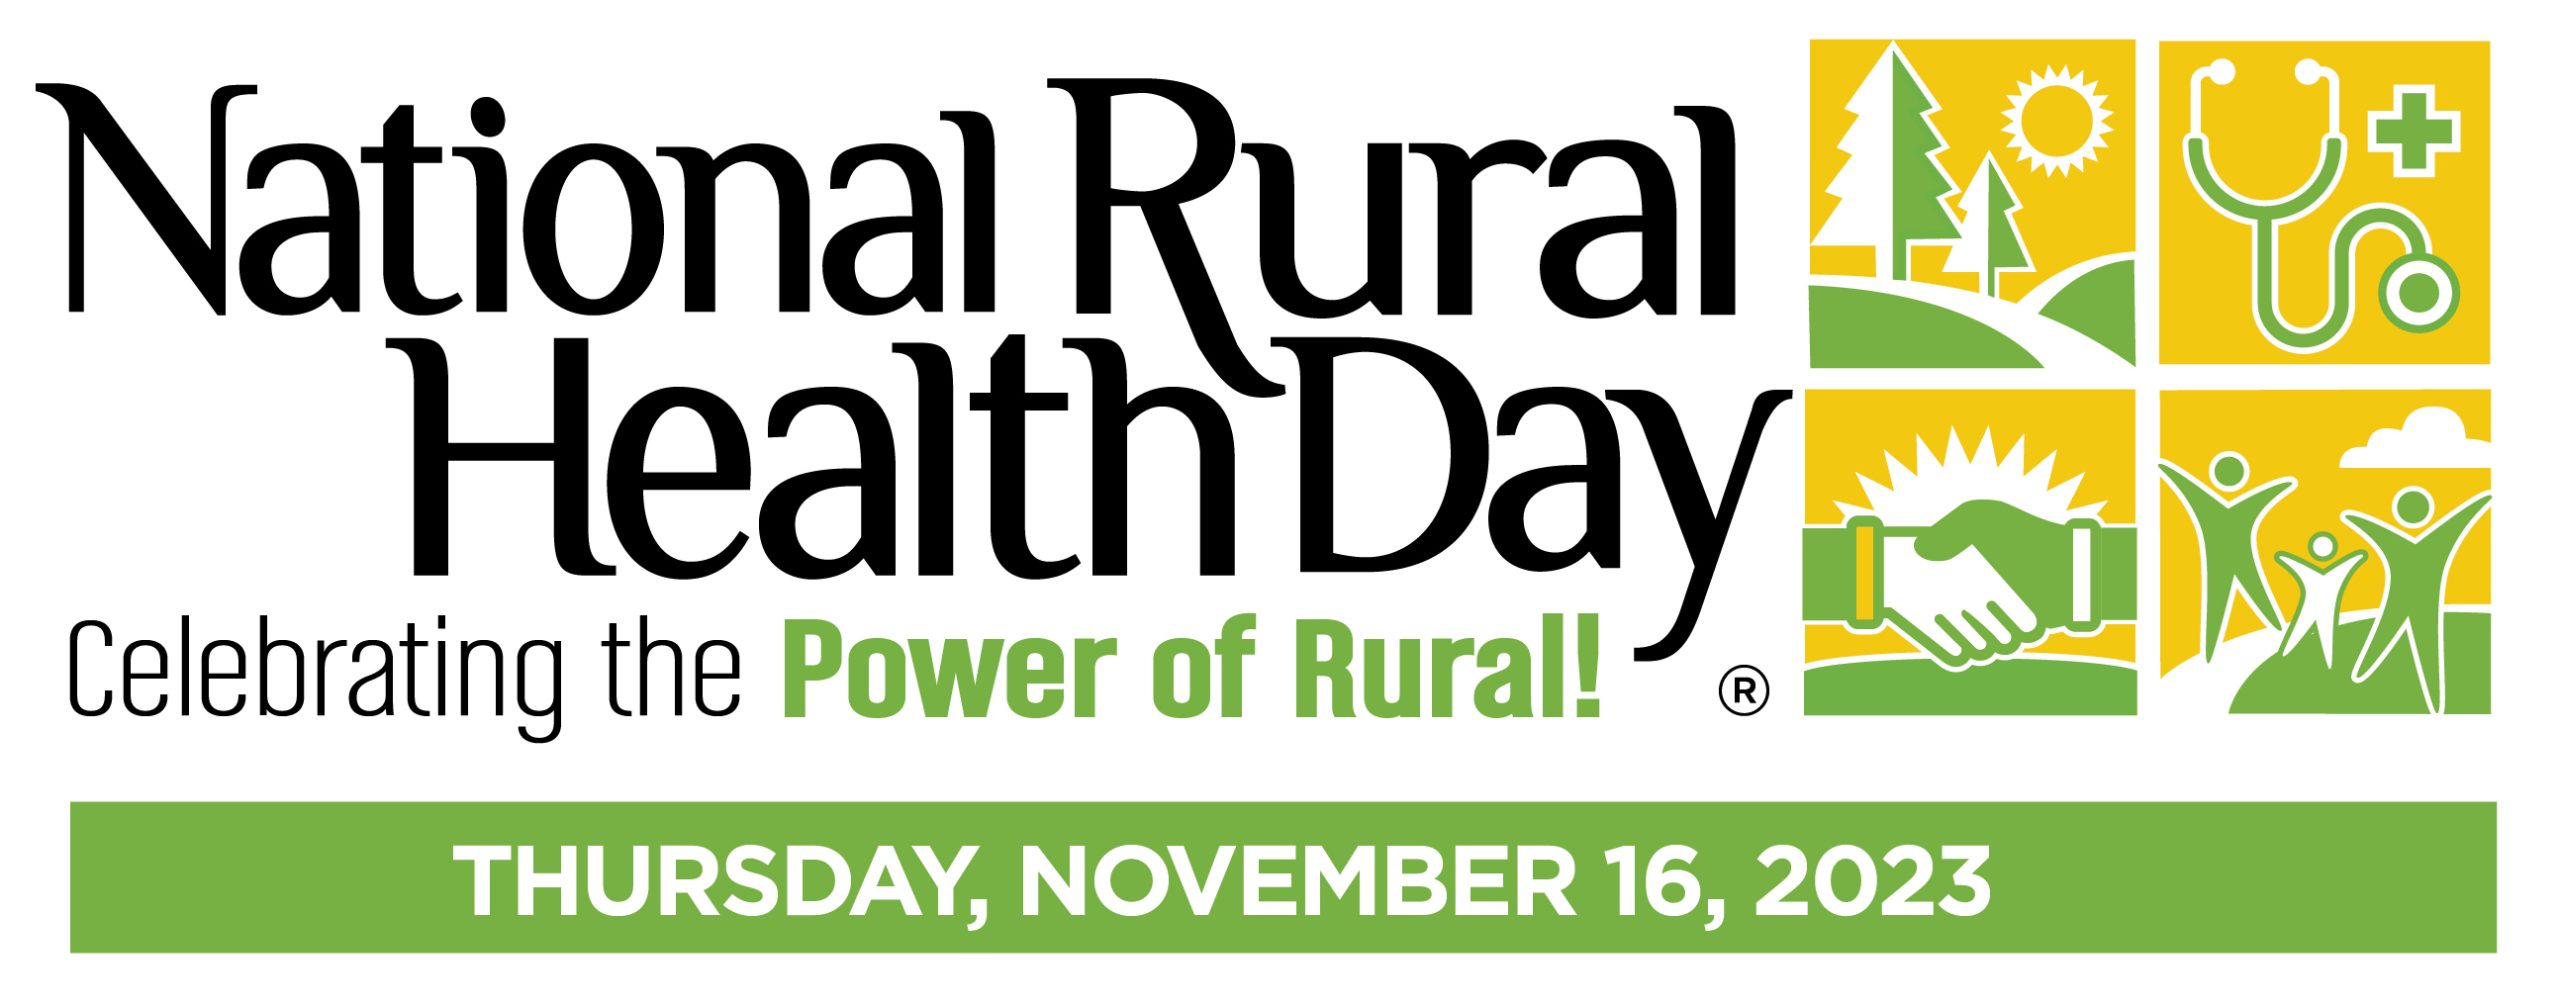 White background black text reading "National Rural Health Day," green and white banner below with dat, upper right corner yellow white and green images (four) representing rural health.